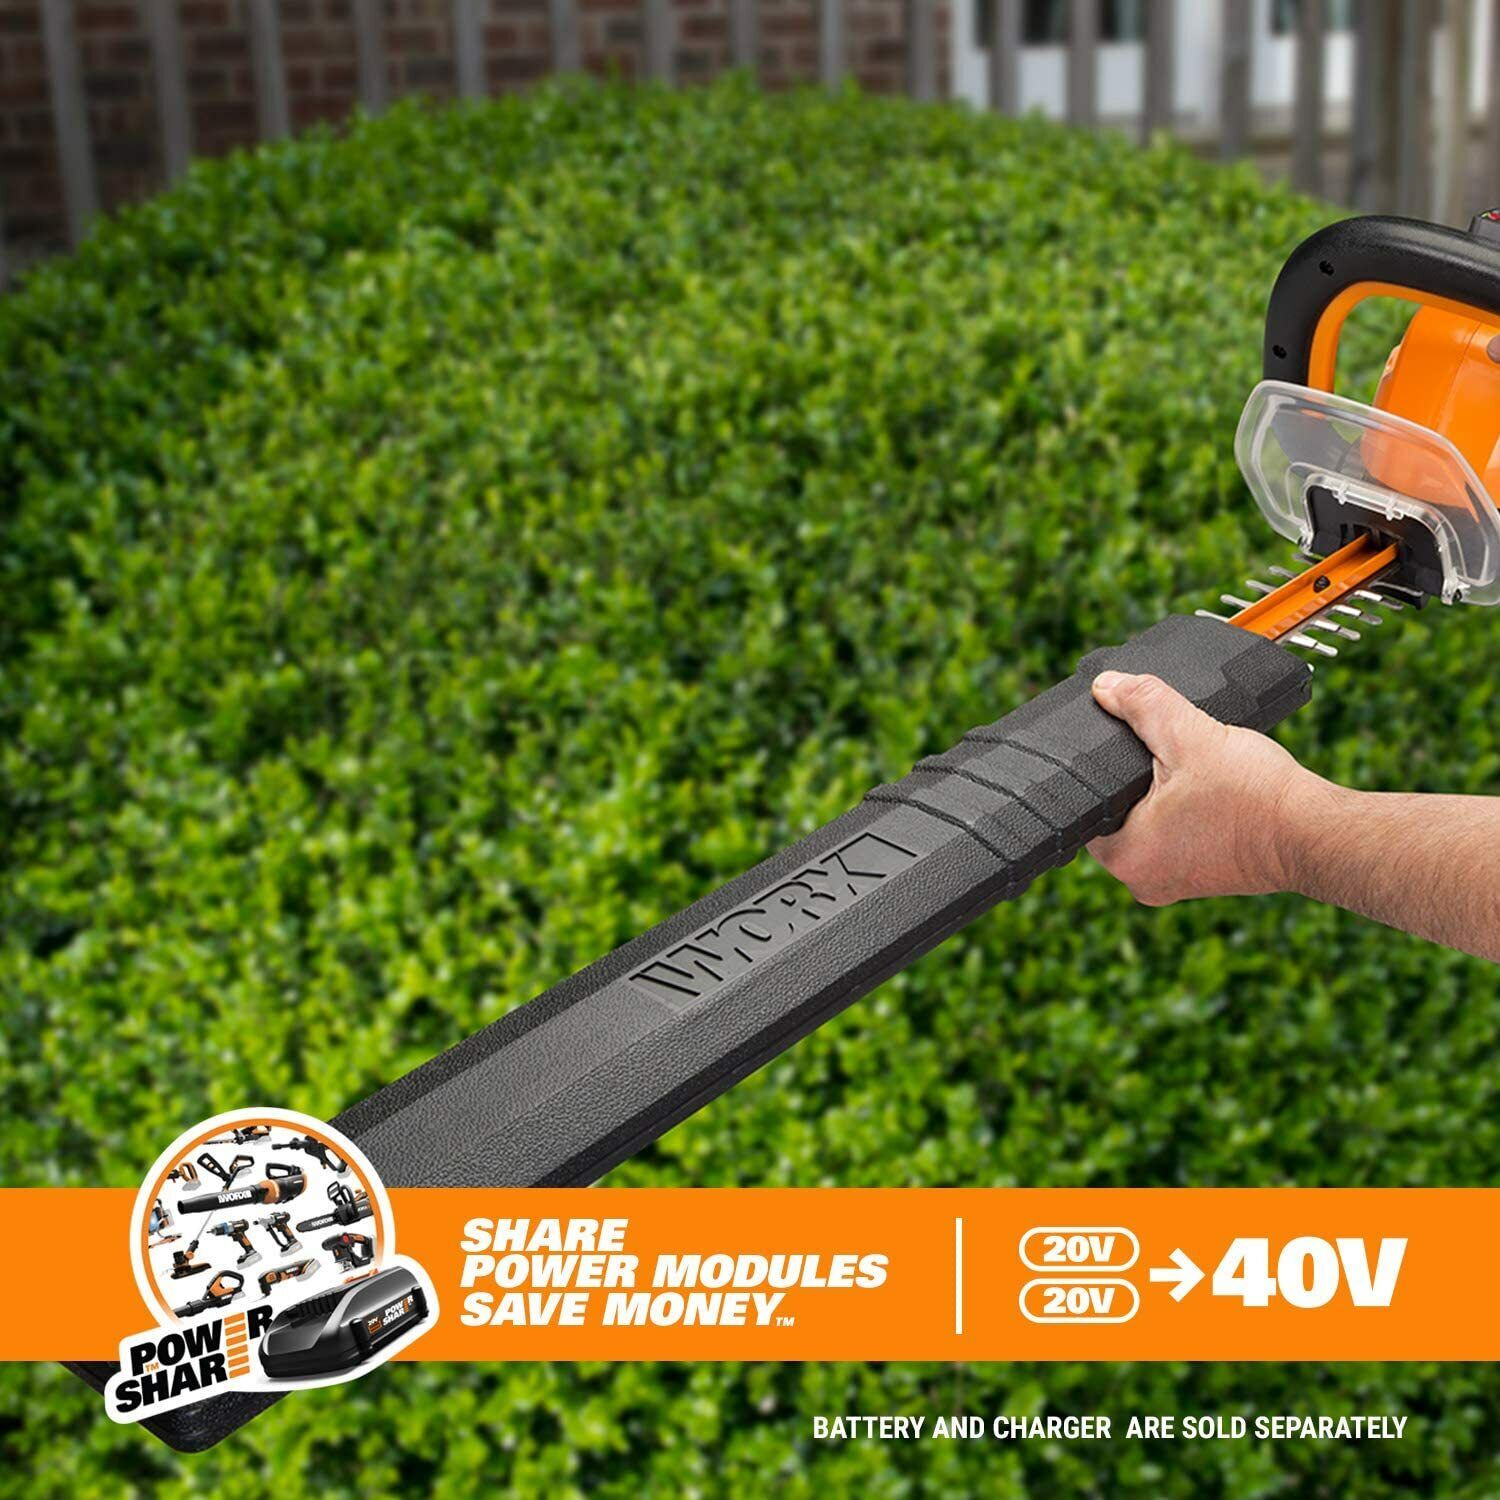 Worx WG284.9 40V Power Share 24" Cordless Hedge Trimmer (Tool Only) - image 2 of 10